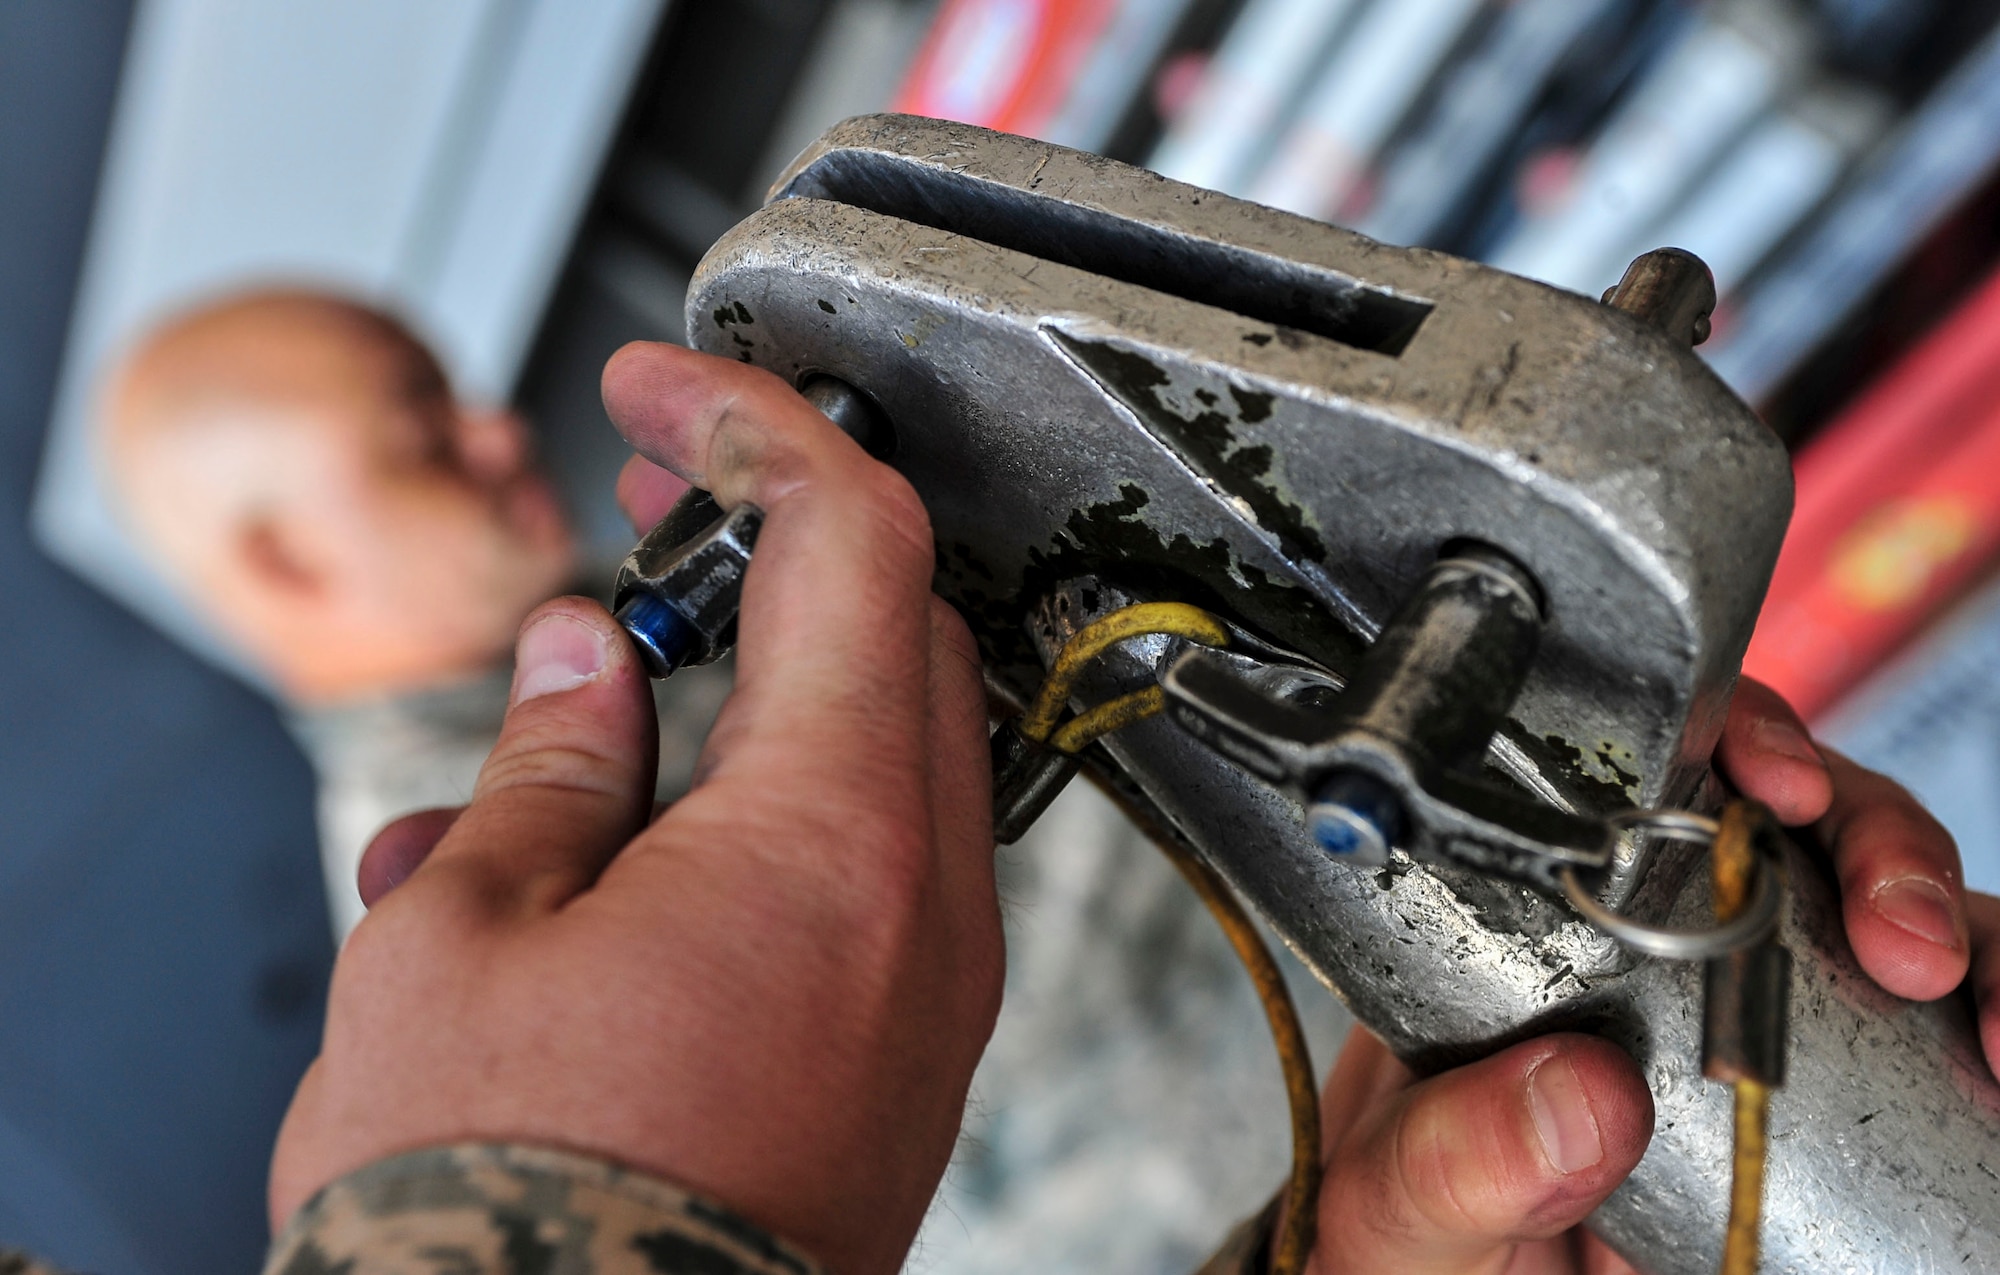 Master Sgt. Jeffrey Thompson, Air Force Global Strike Command Global Strike Challenge Competition evaluator, inspects a piece of bomb loading equipment at Minot Air Force Base, N.D., Aug. 24, 2015. Thompson was one of two evaluators present to judge the bomb loading portion of the competition. (U.S. Air Force photo/Senior Airman Stephanie Morris)